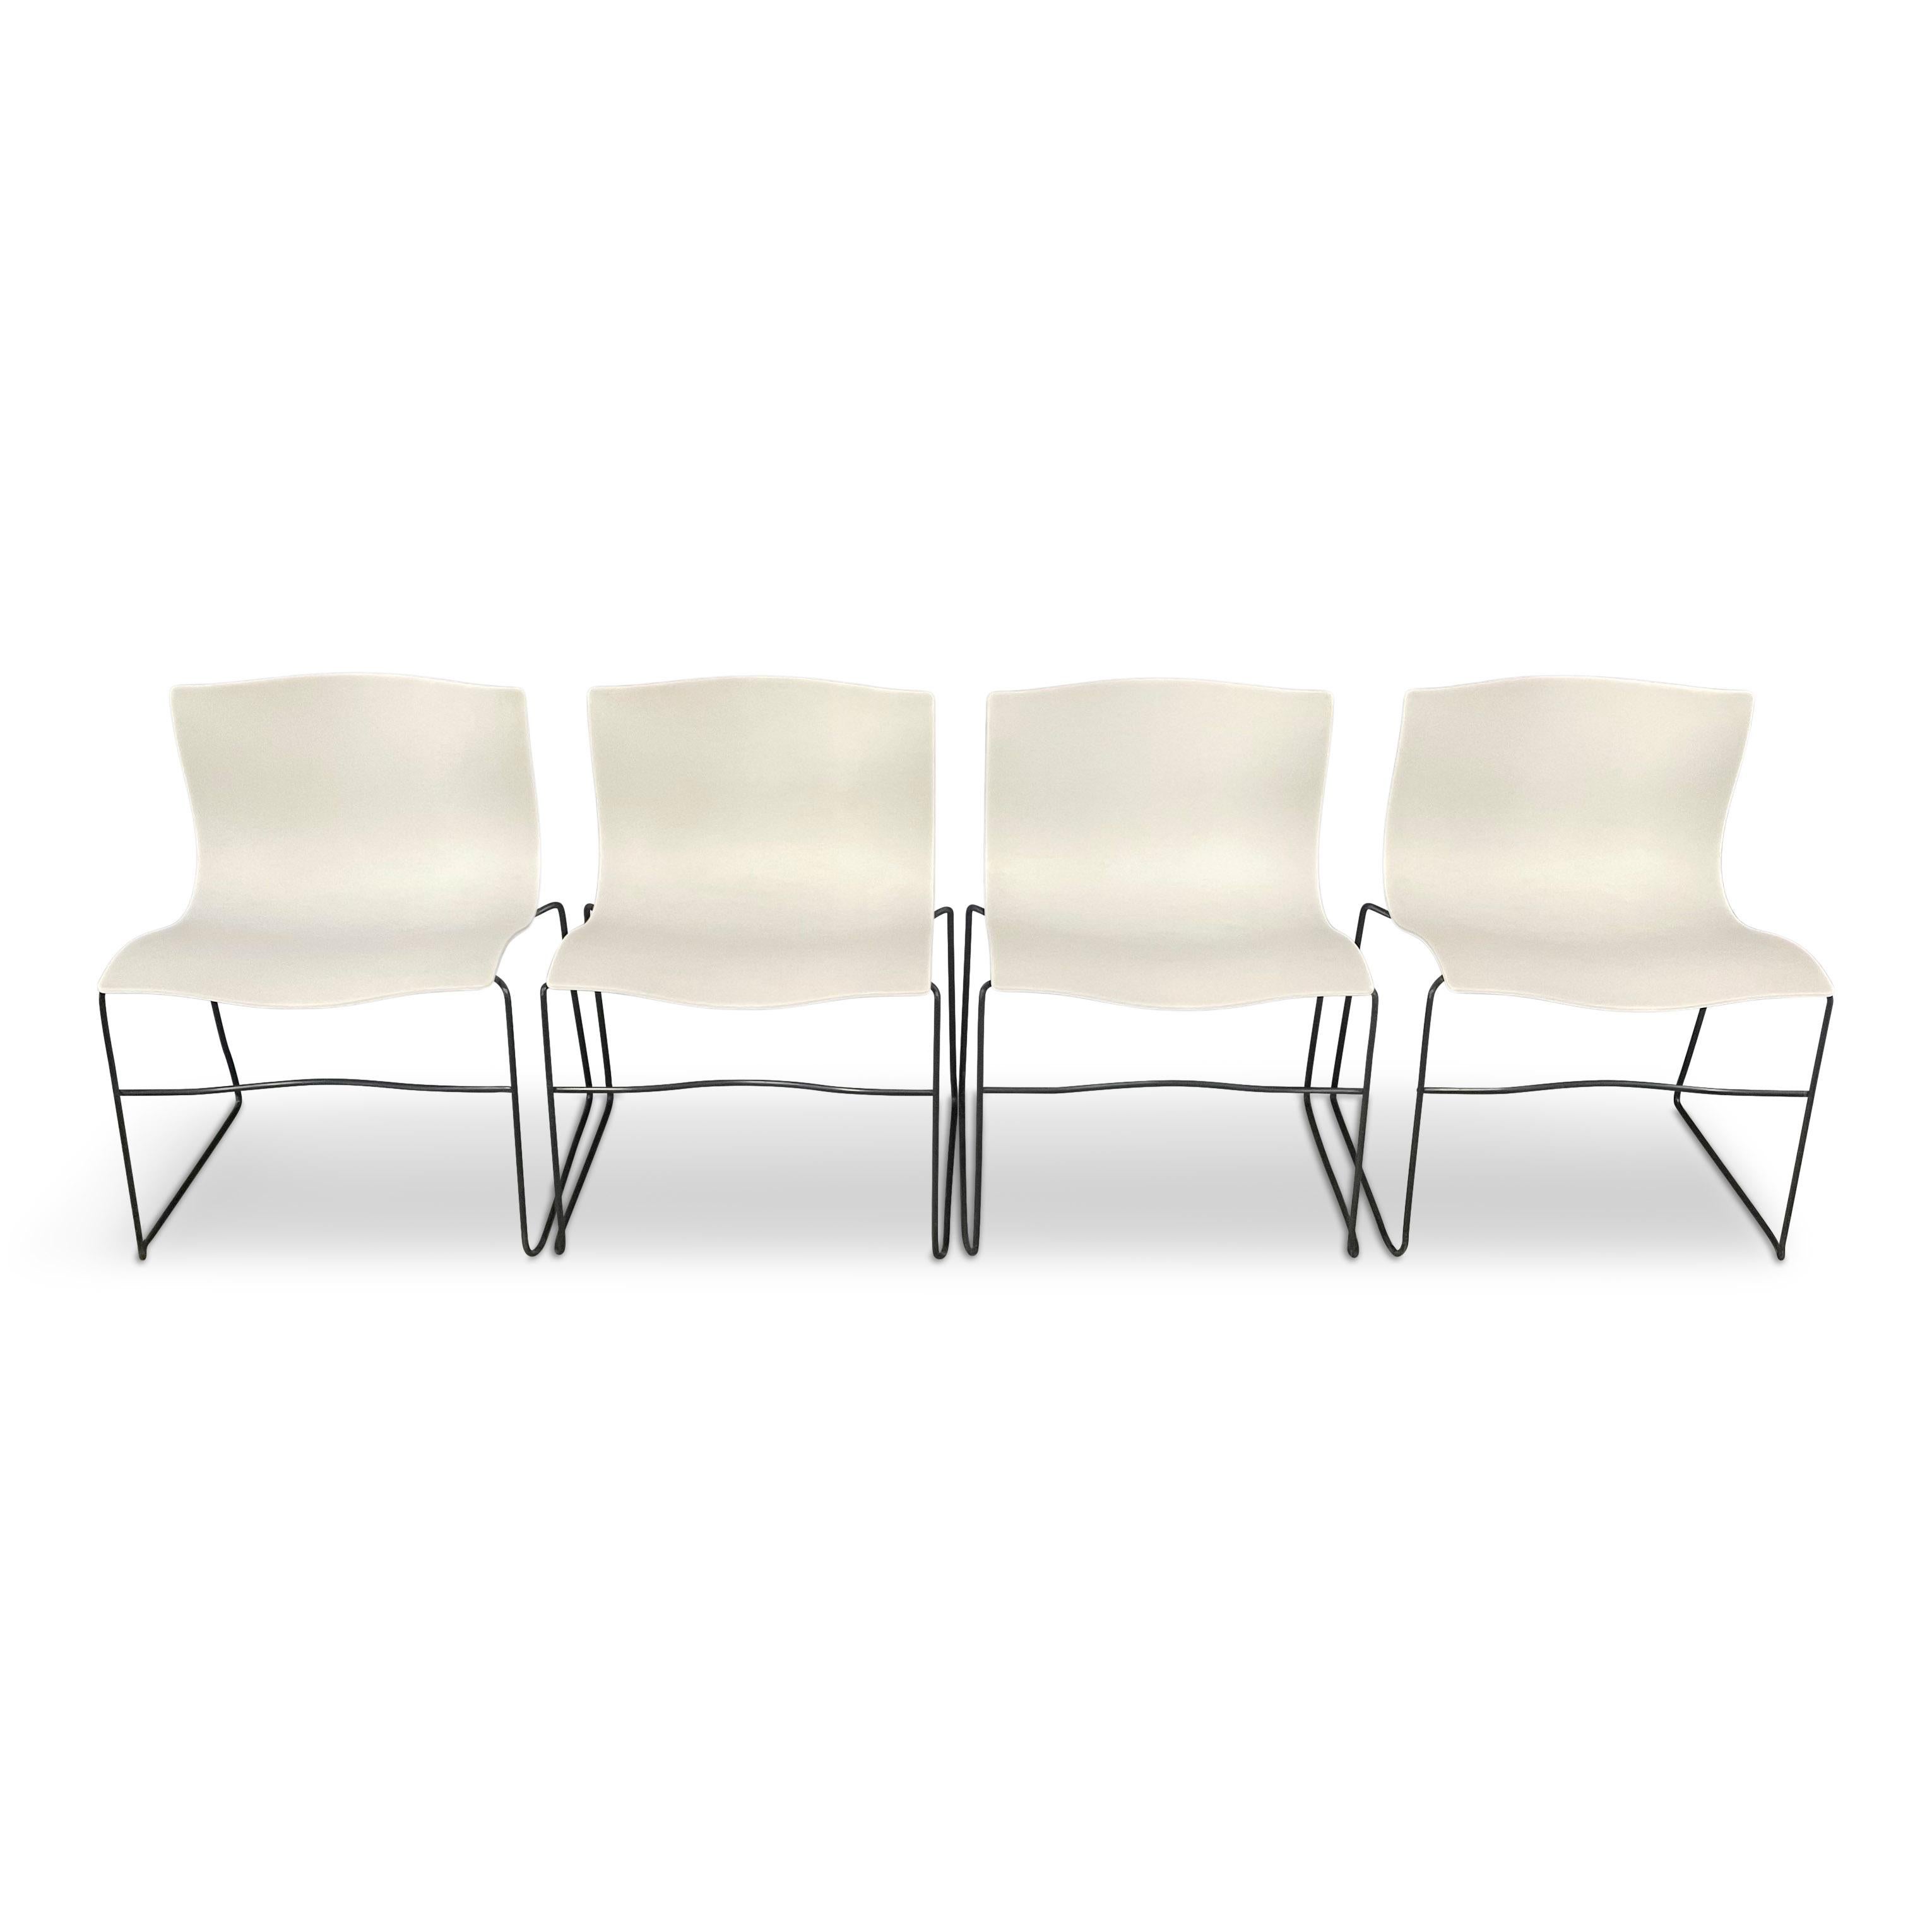 Post-Modern Handkerchief Chairs in White by Massimo Vignelli for Knoll Post Modern a Pair For Sale